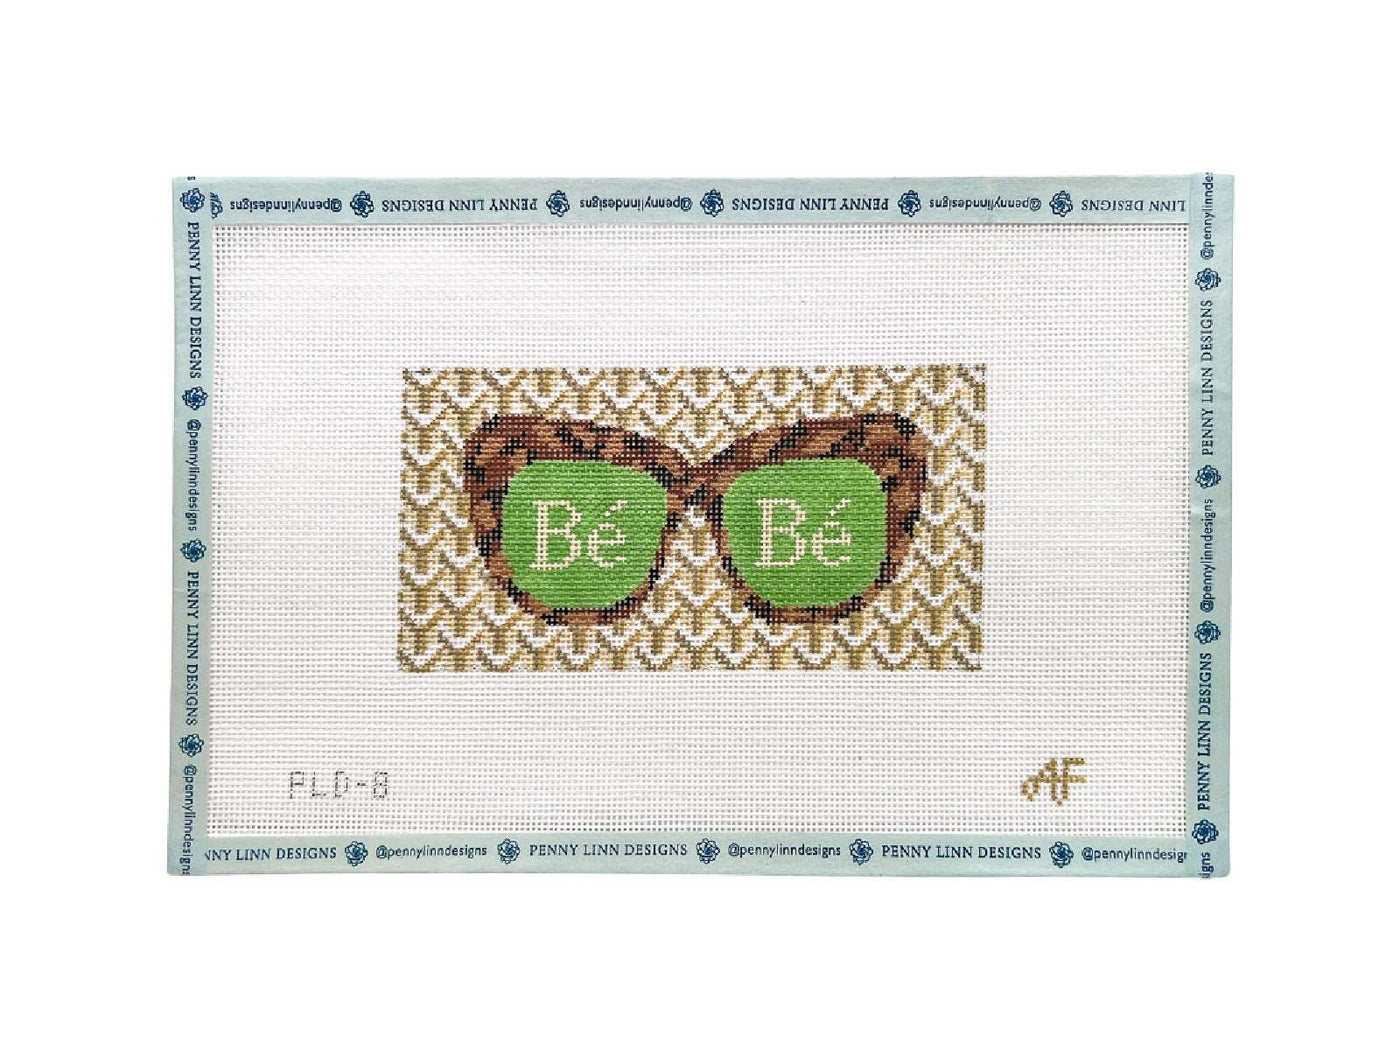 Limited Edition Anne Fisher x Penny Linn Designs Bebe Sunglasses - Penny Linn Designs - Penny Linn Designs